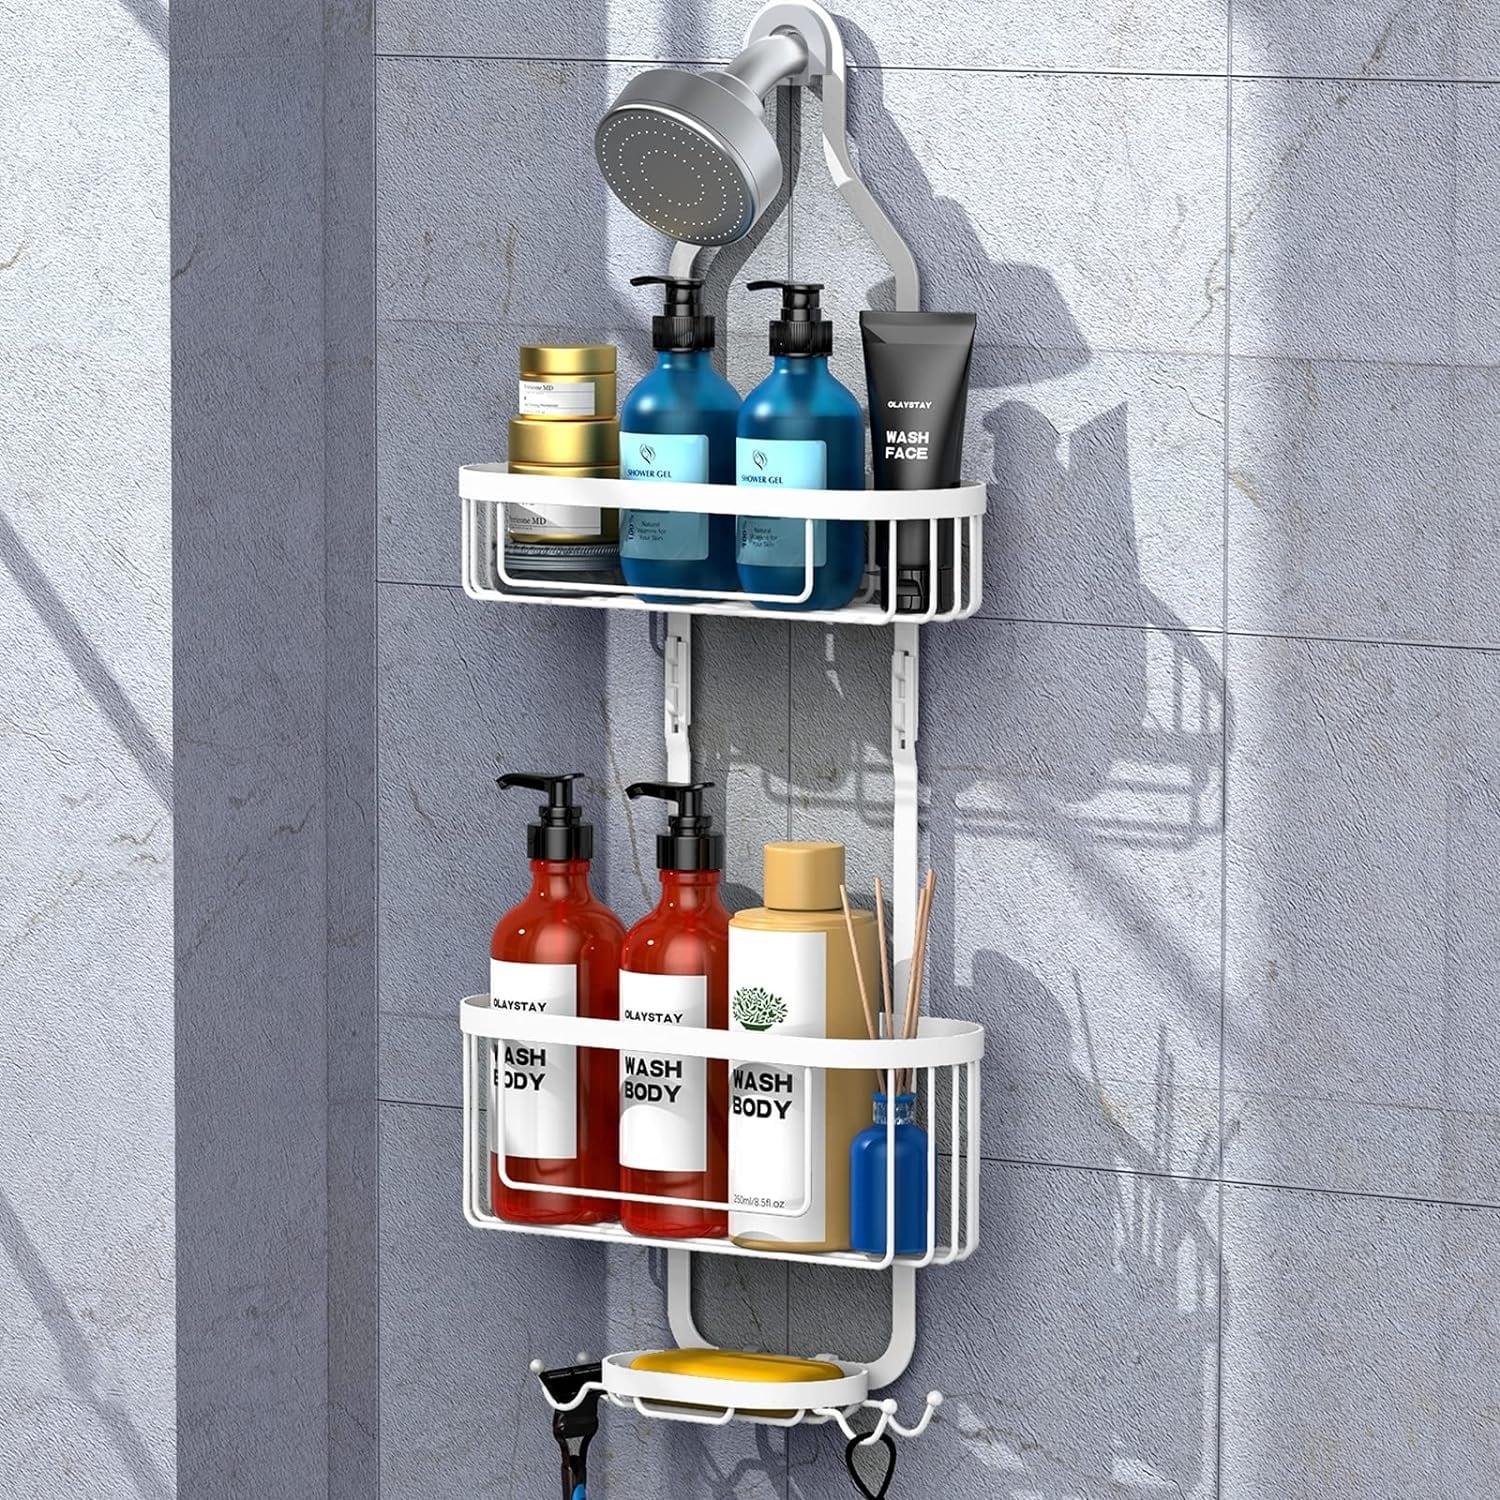 ToiletTree Products Stainless Steel Floor Shower Caddy - Corner Caddy Shelf  for Bathroom and Shower Storage - Rust-Proof Shower Caddy for Shampoo